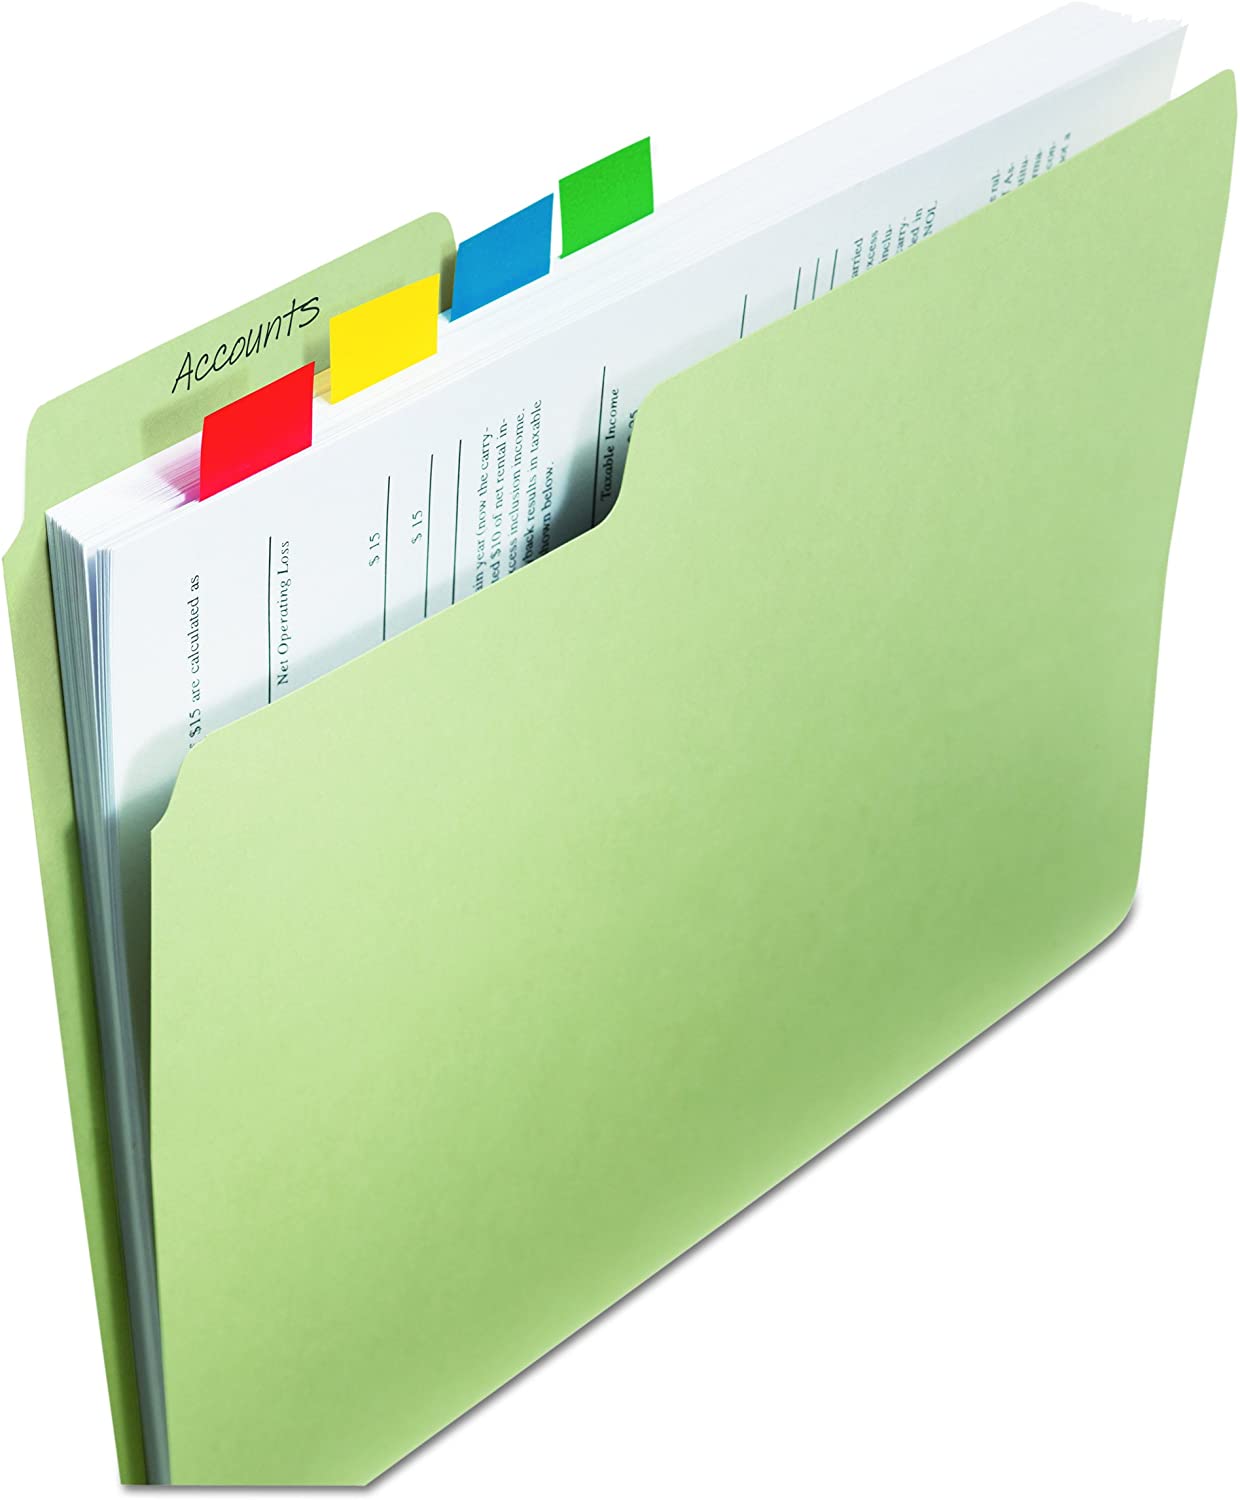 5 Pack - Post-it Standard Page Flags in Dispenser, Yellow, 1 inch Wide, 100/Pack